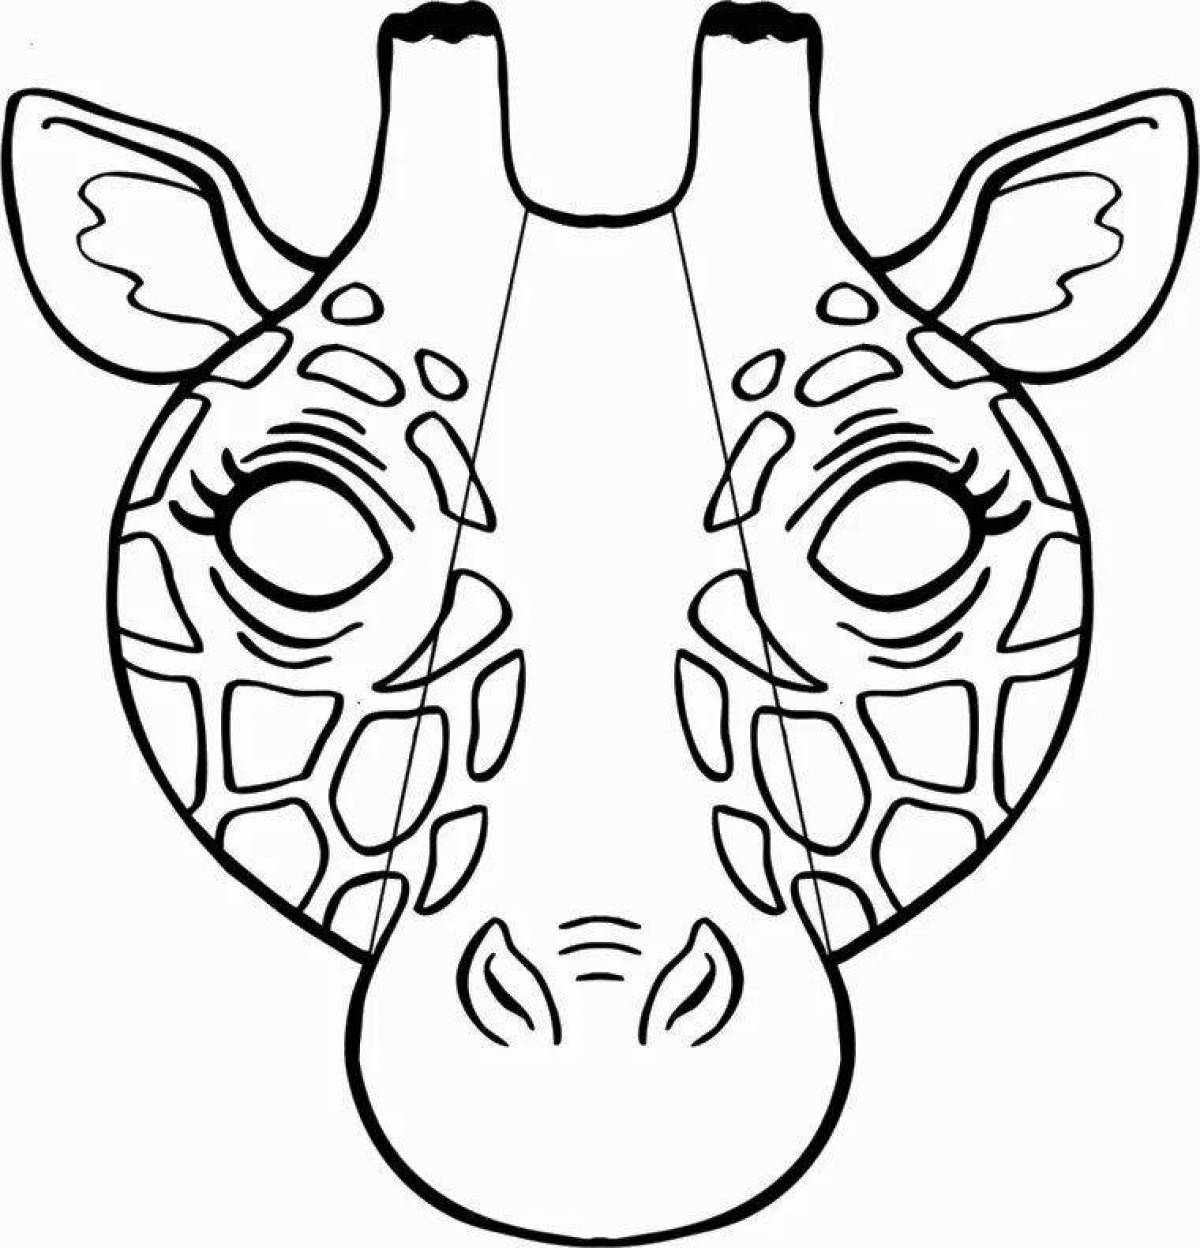 Coloring colorful masks for kids